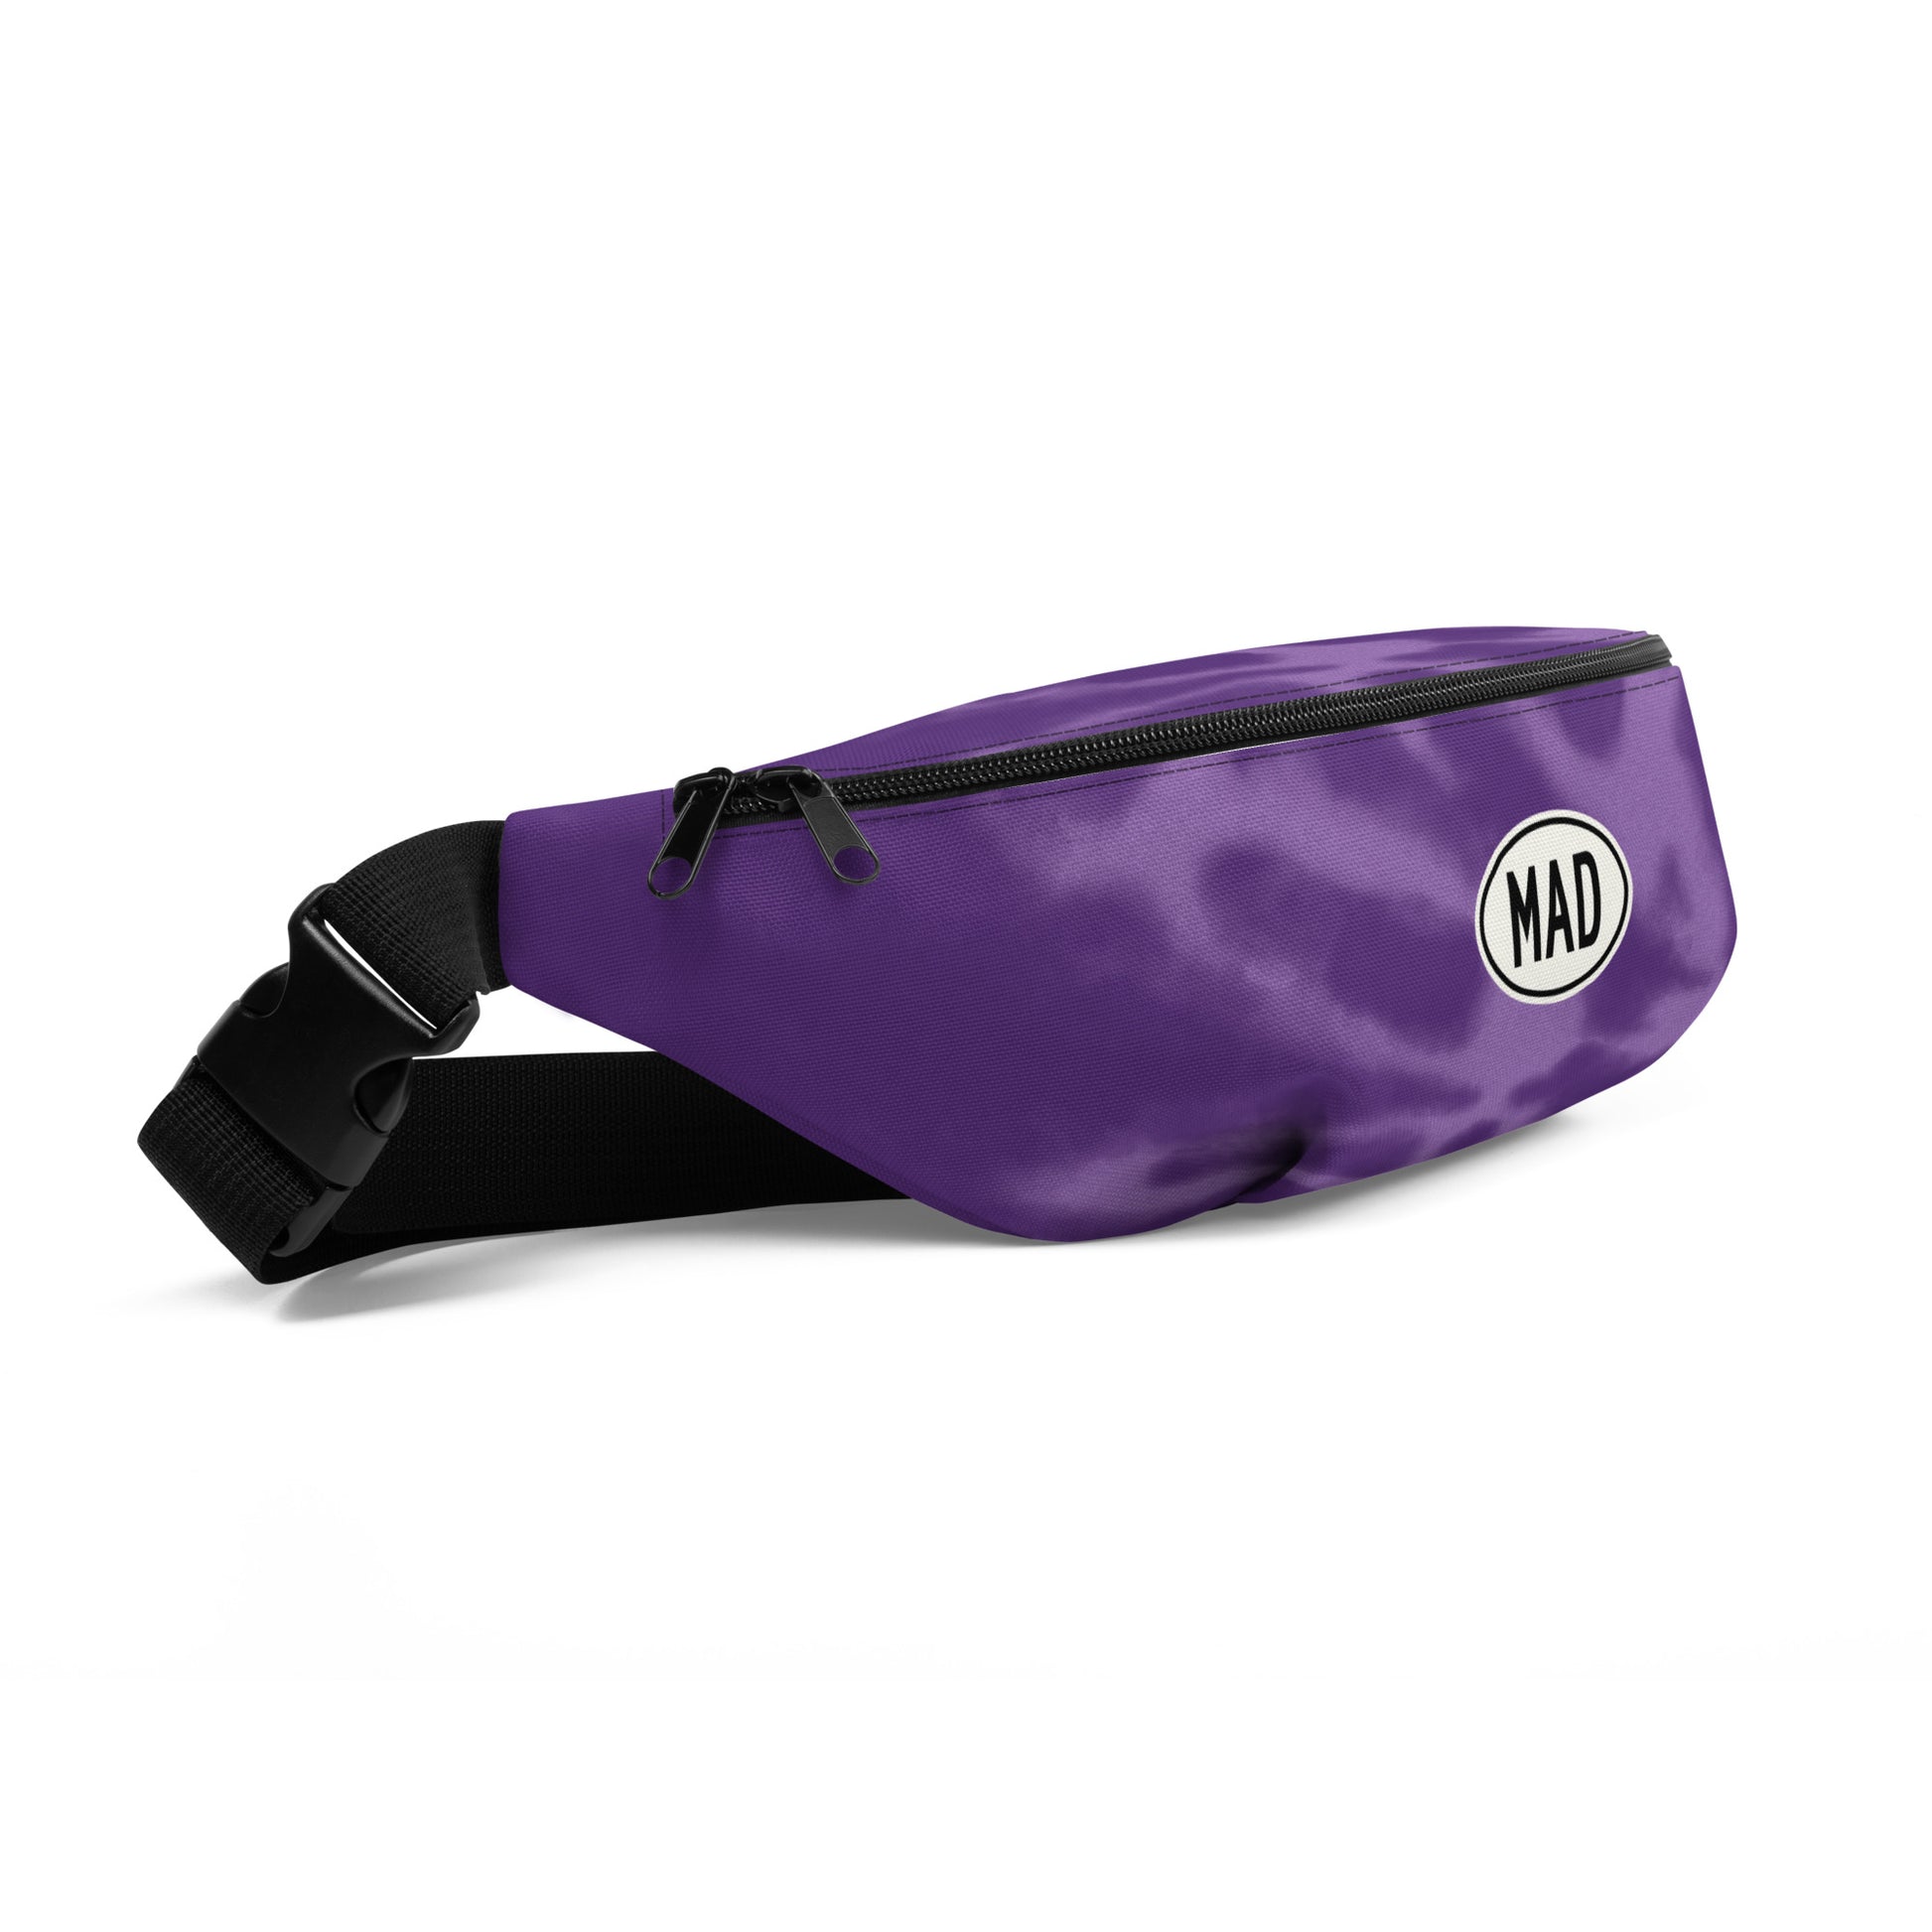 Travel Gift Fanny Pack - Purple Tie-Dye • MAD Madrid • YHM Designs - Image 07